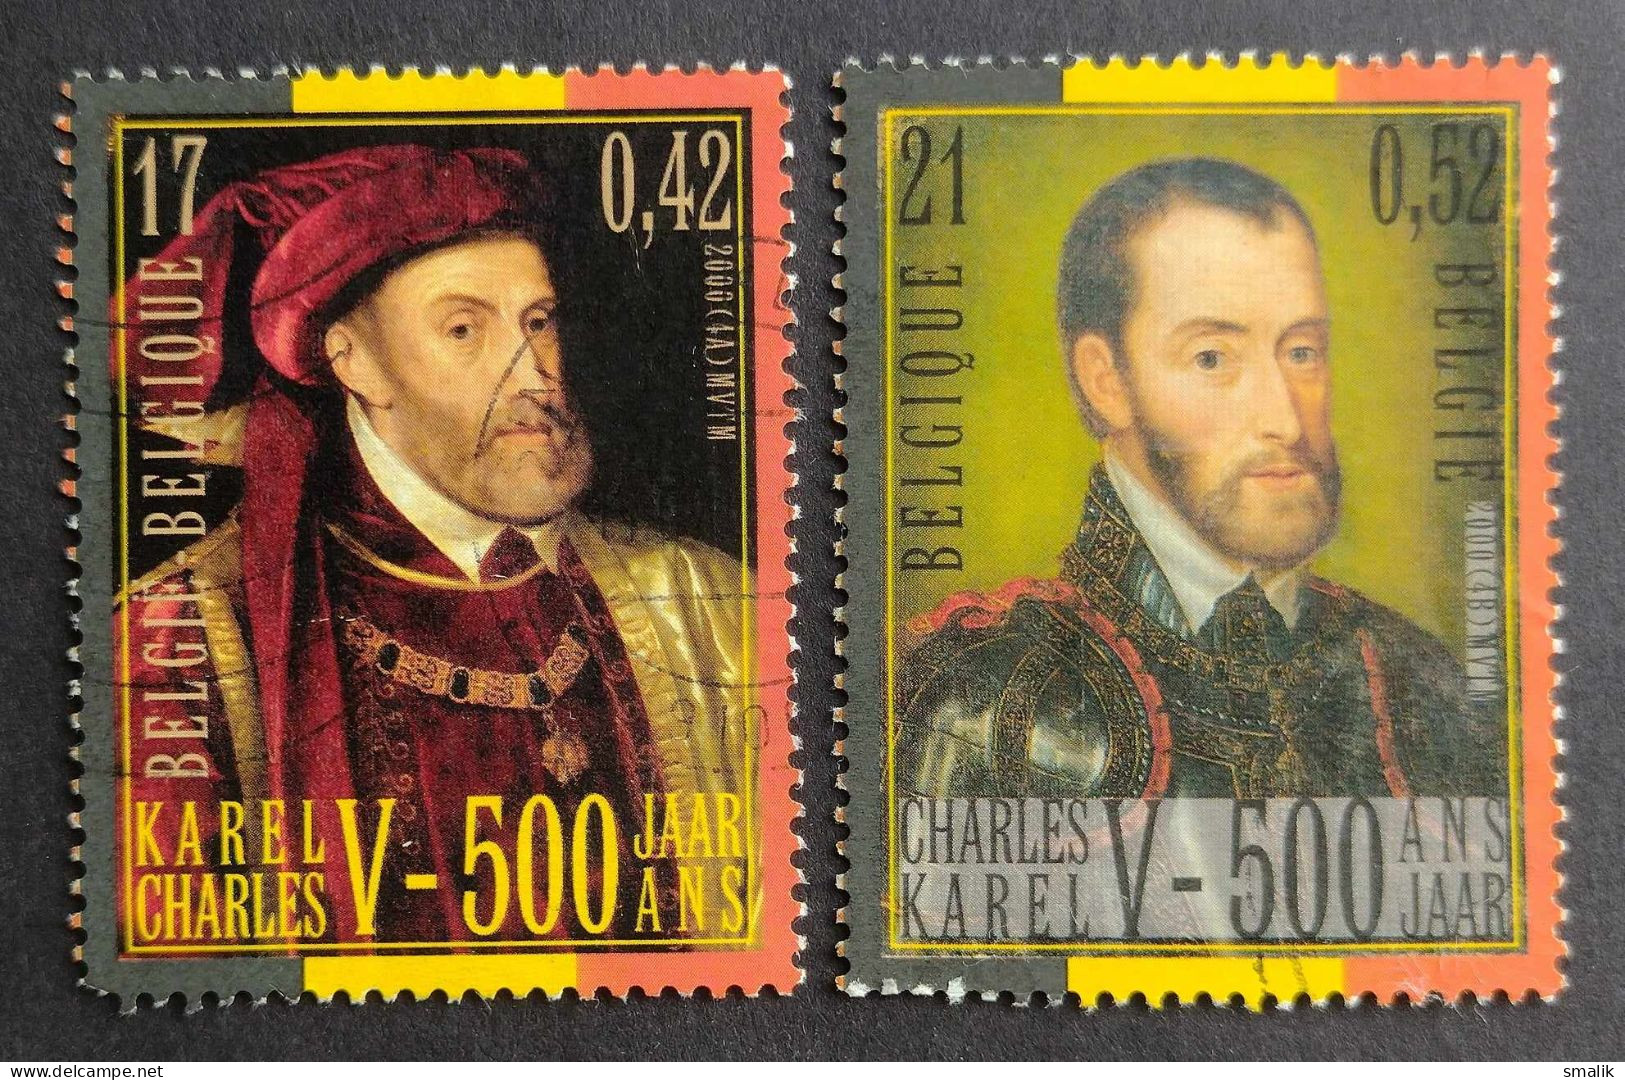 BELGIUM 2000 - Joint Issue With Spain, 500th Birth Anniversary Of Carlos, Complete Set Of 2v. Fine Used - Used Stamps